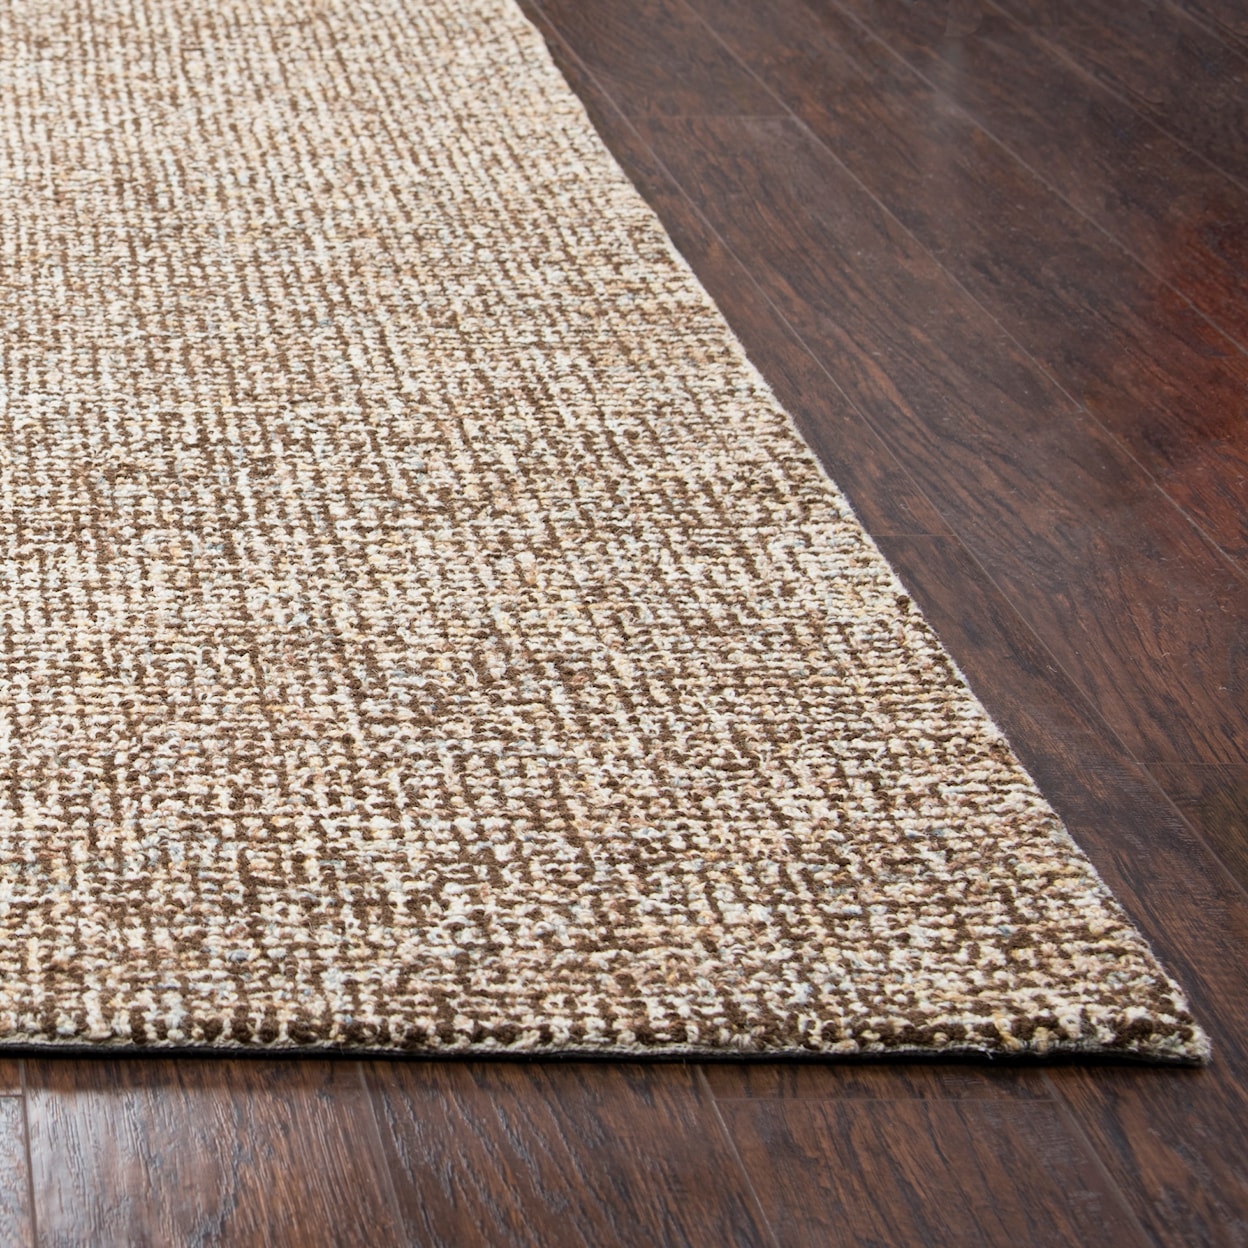 Rizzy Home Brindleton 12' x 15' Rectangle Rug